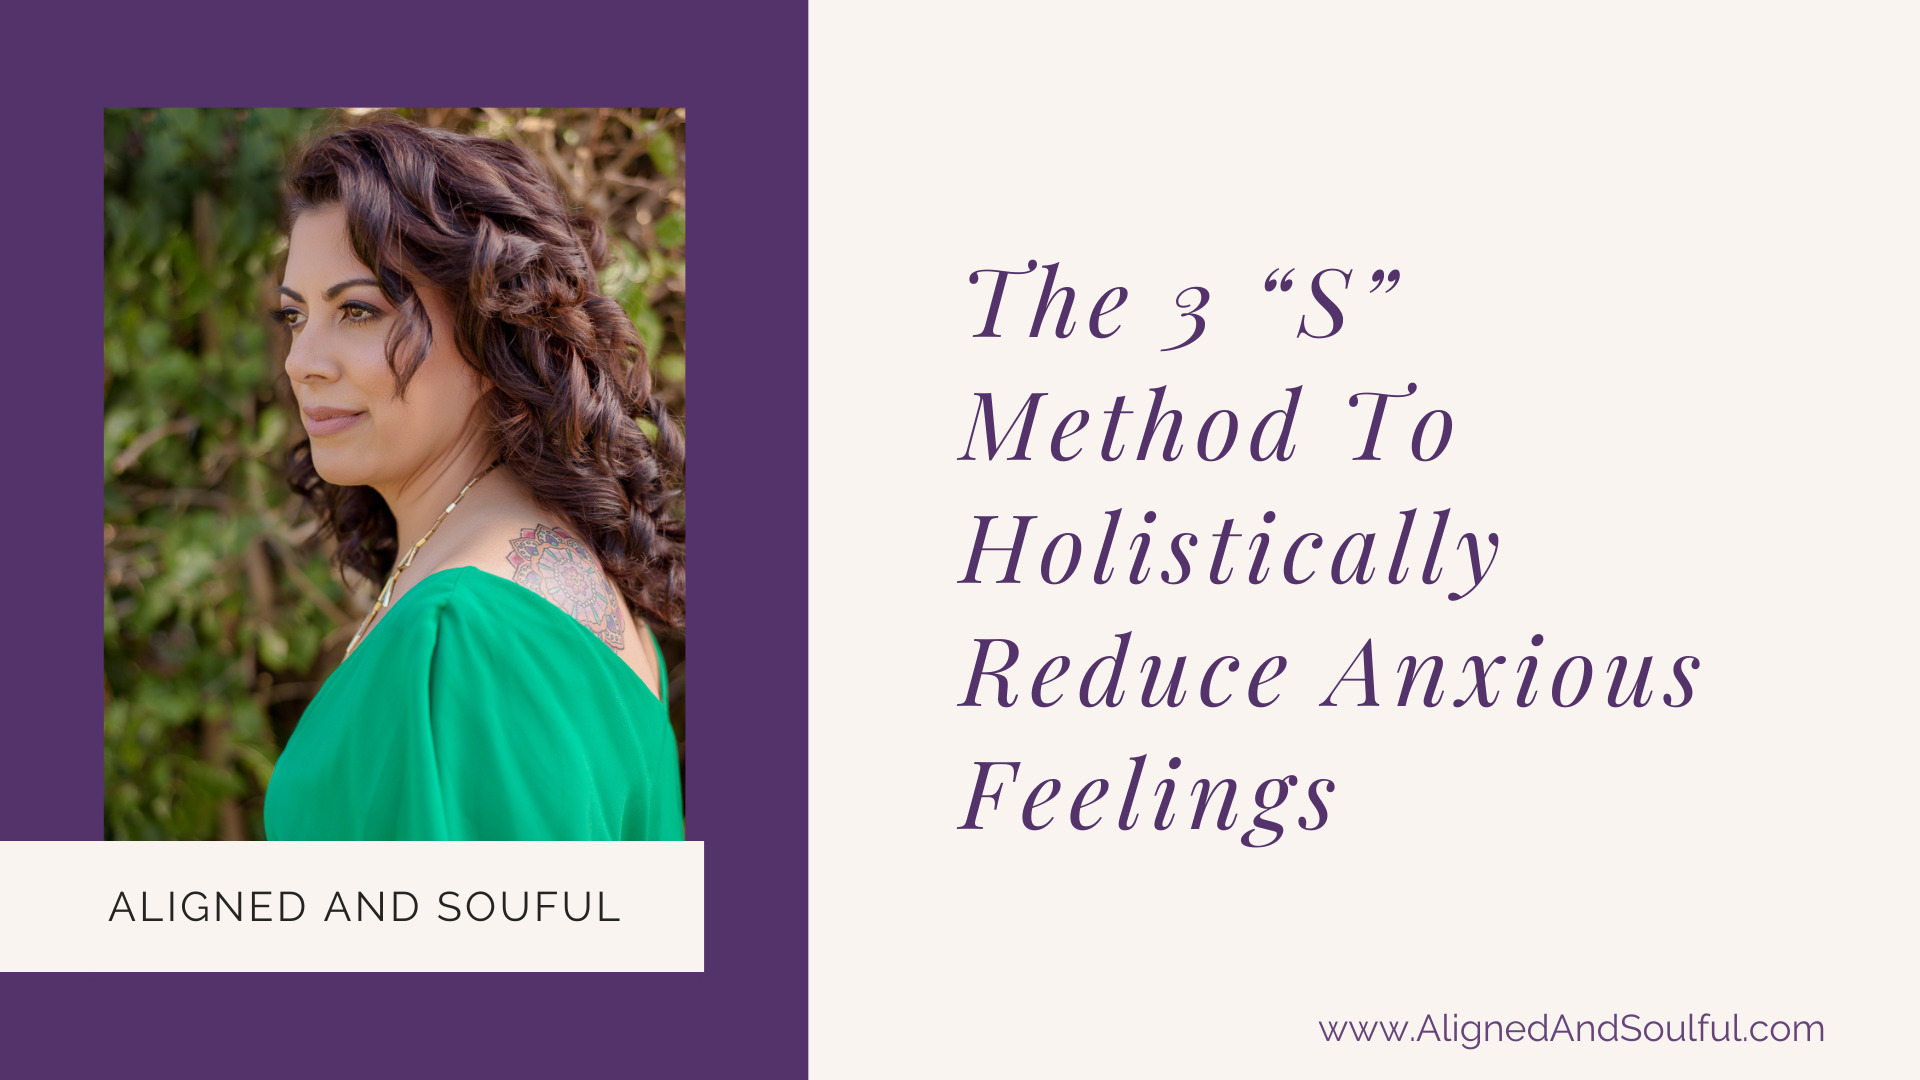 The 3 “S” Method to Reduce Anxiety Holistically